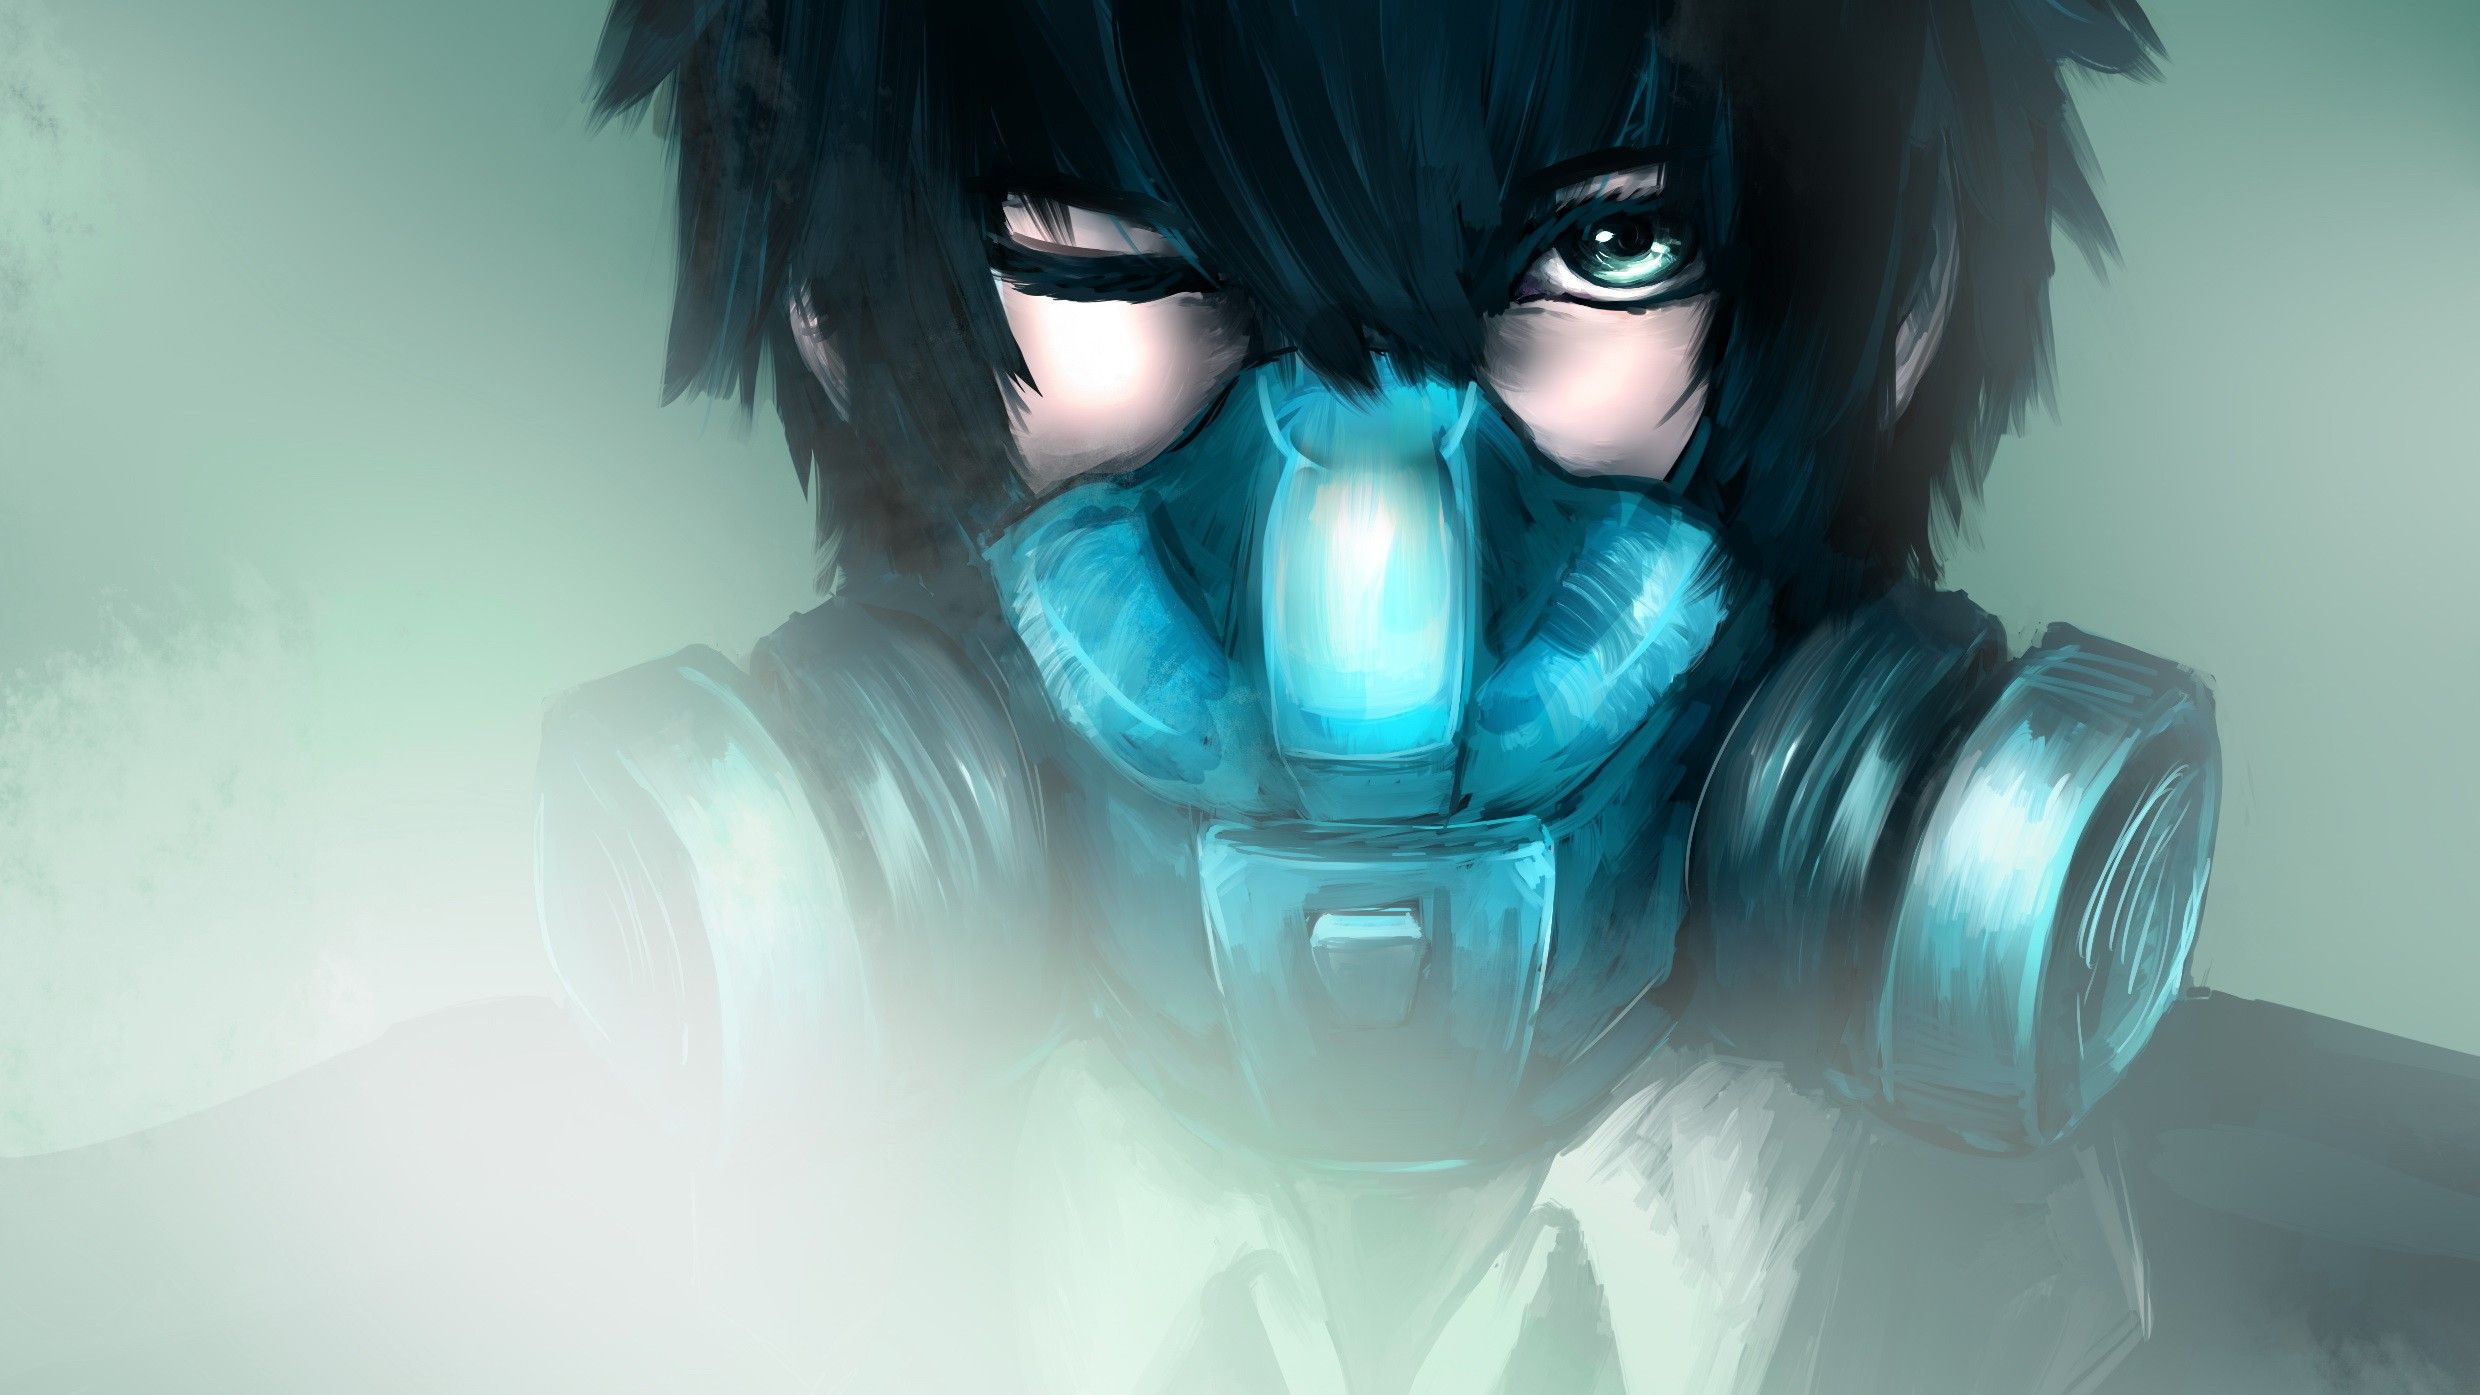 Mask Boy Anime Wallpapers - Wallpaper Cave